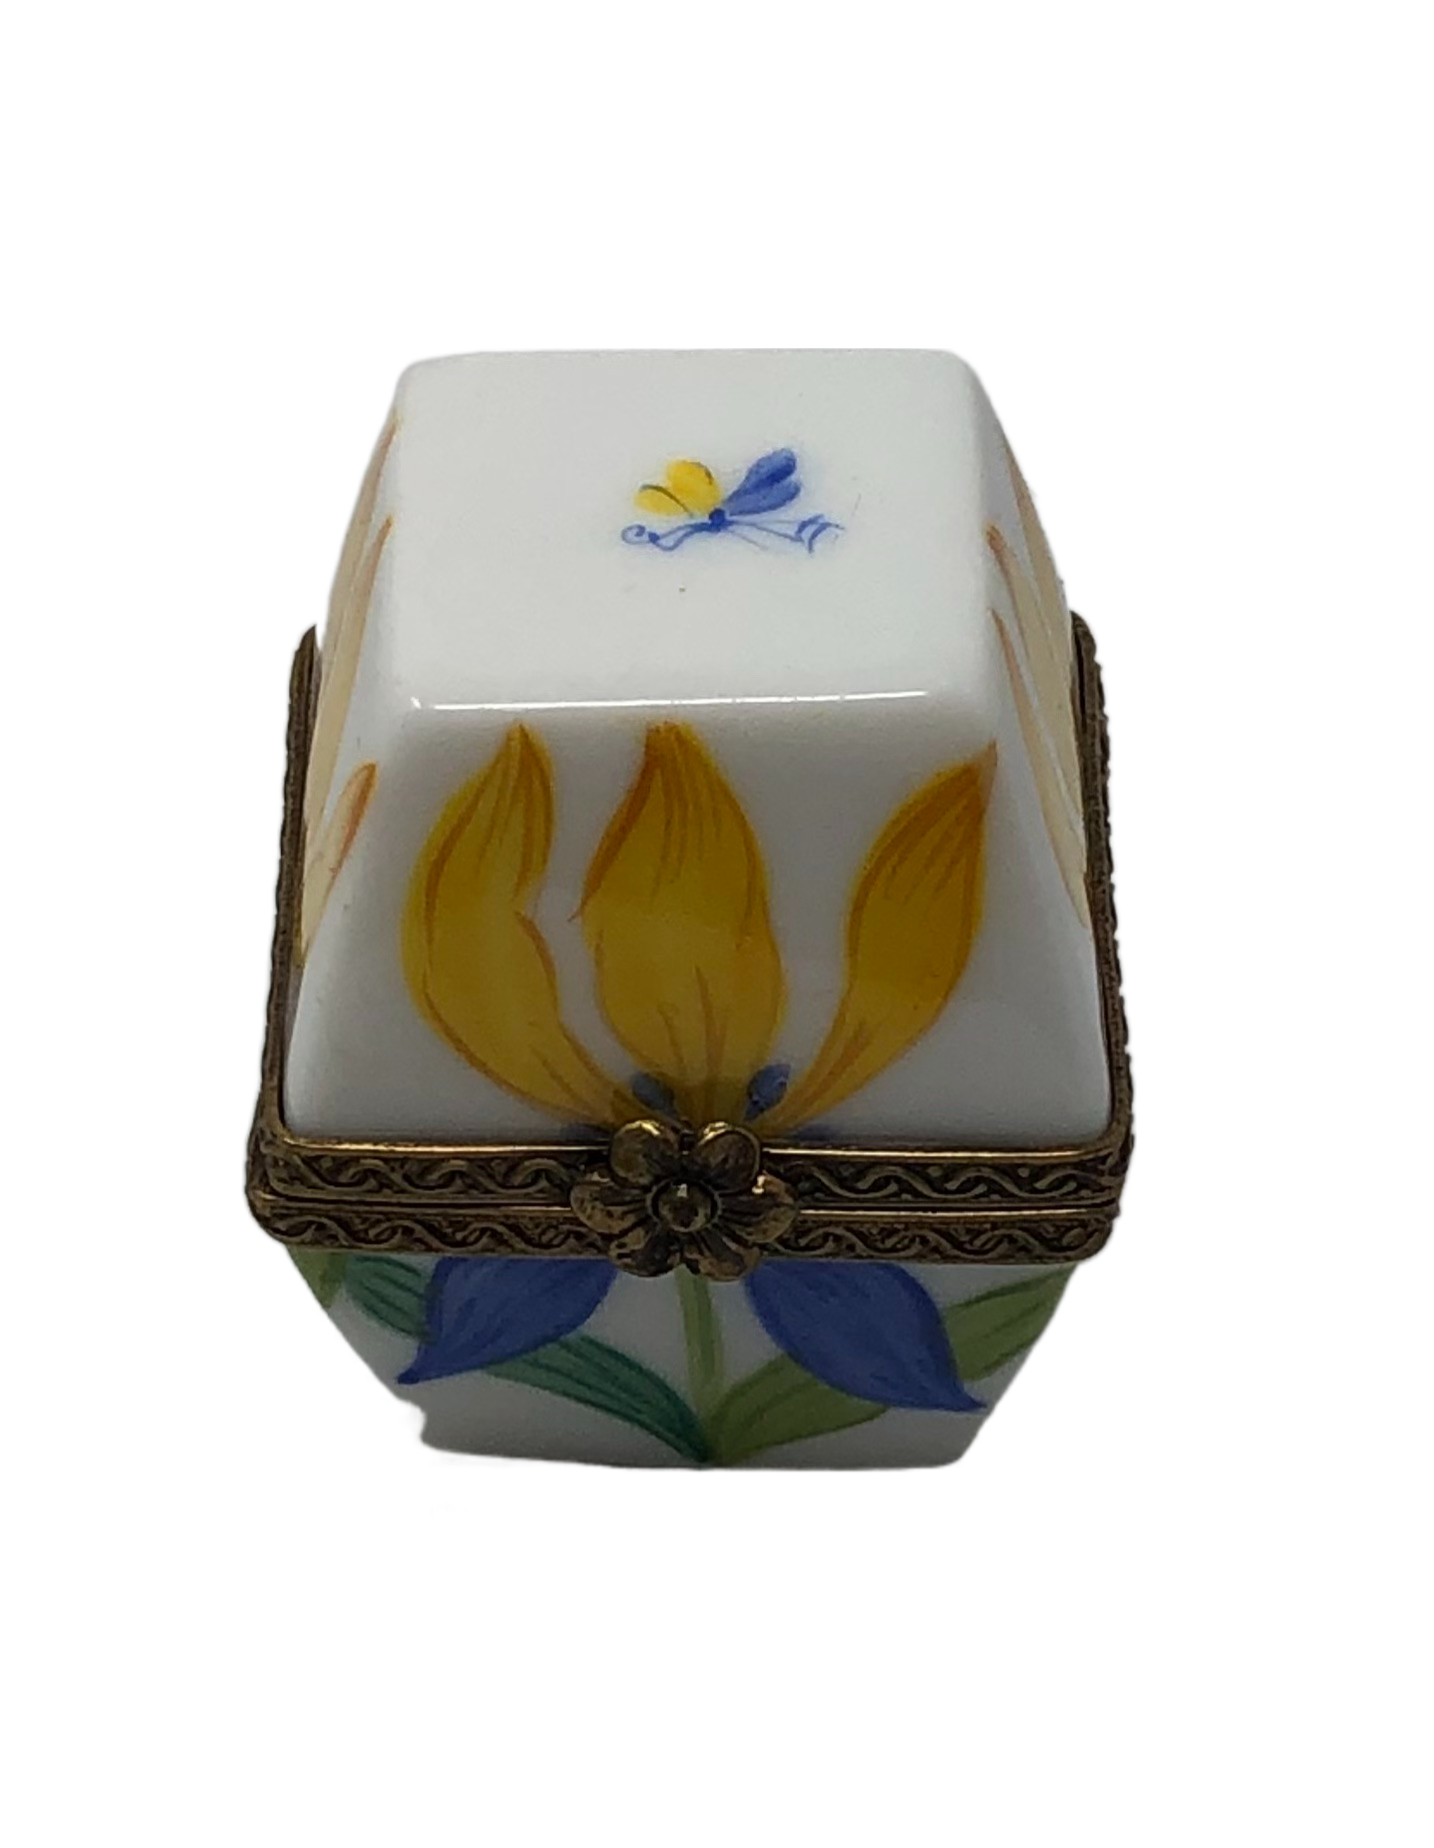 Fire and Ice Blooms: Blue and Yellow/Orange Flower Limoges Box